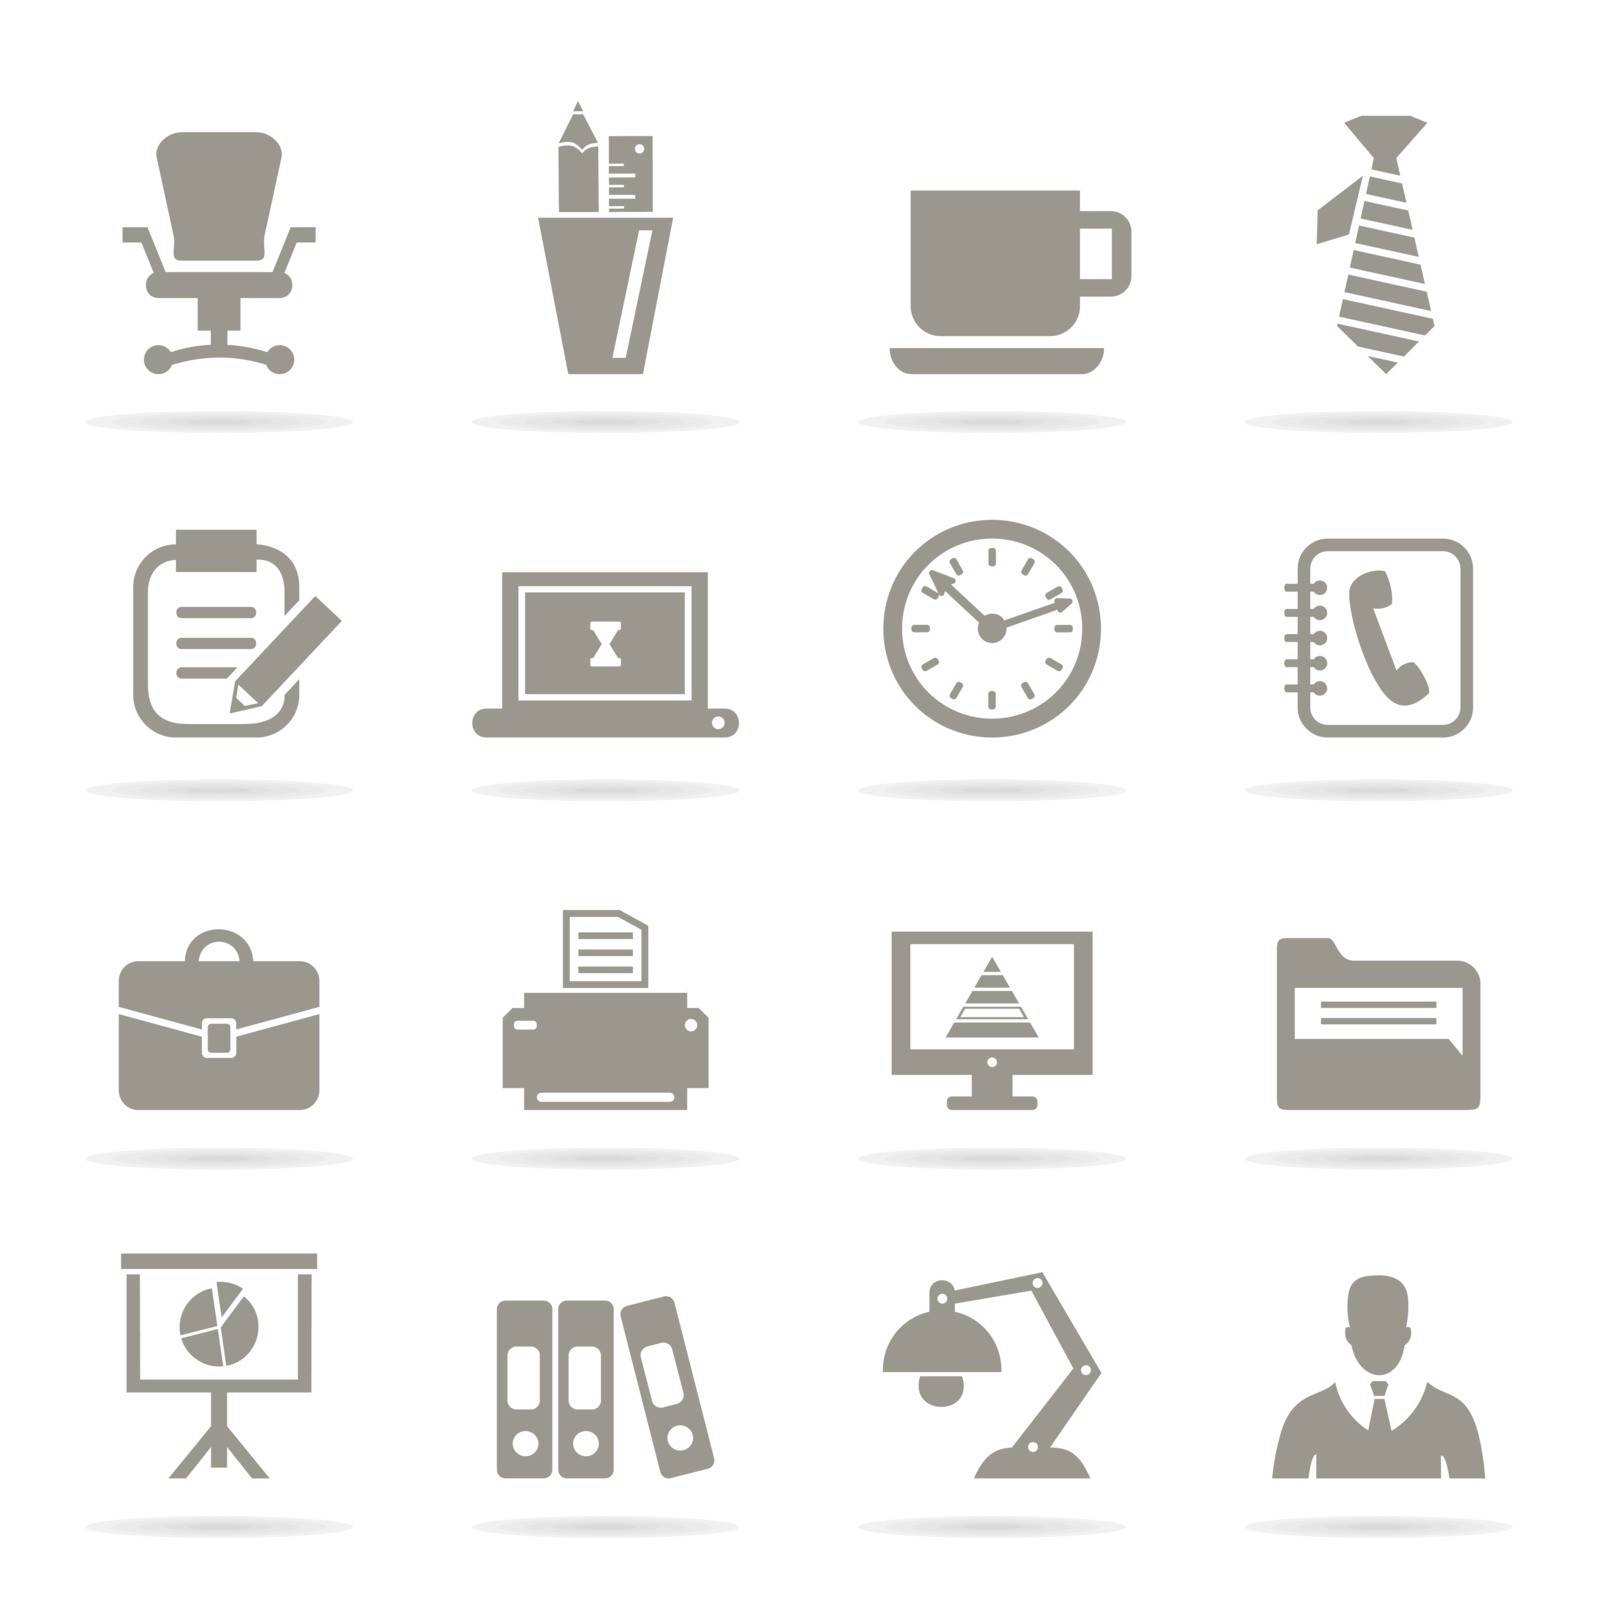 Set of icons office. A vector illustration